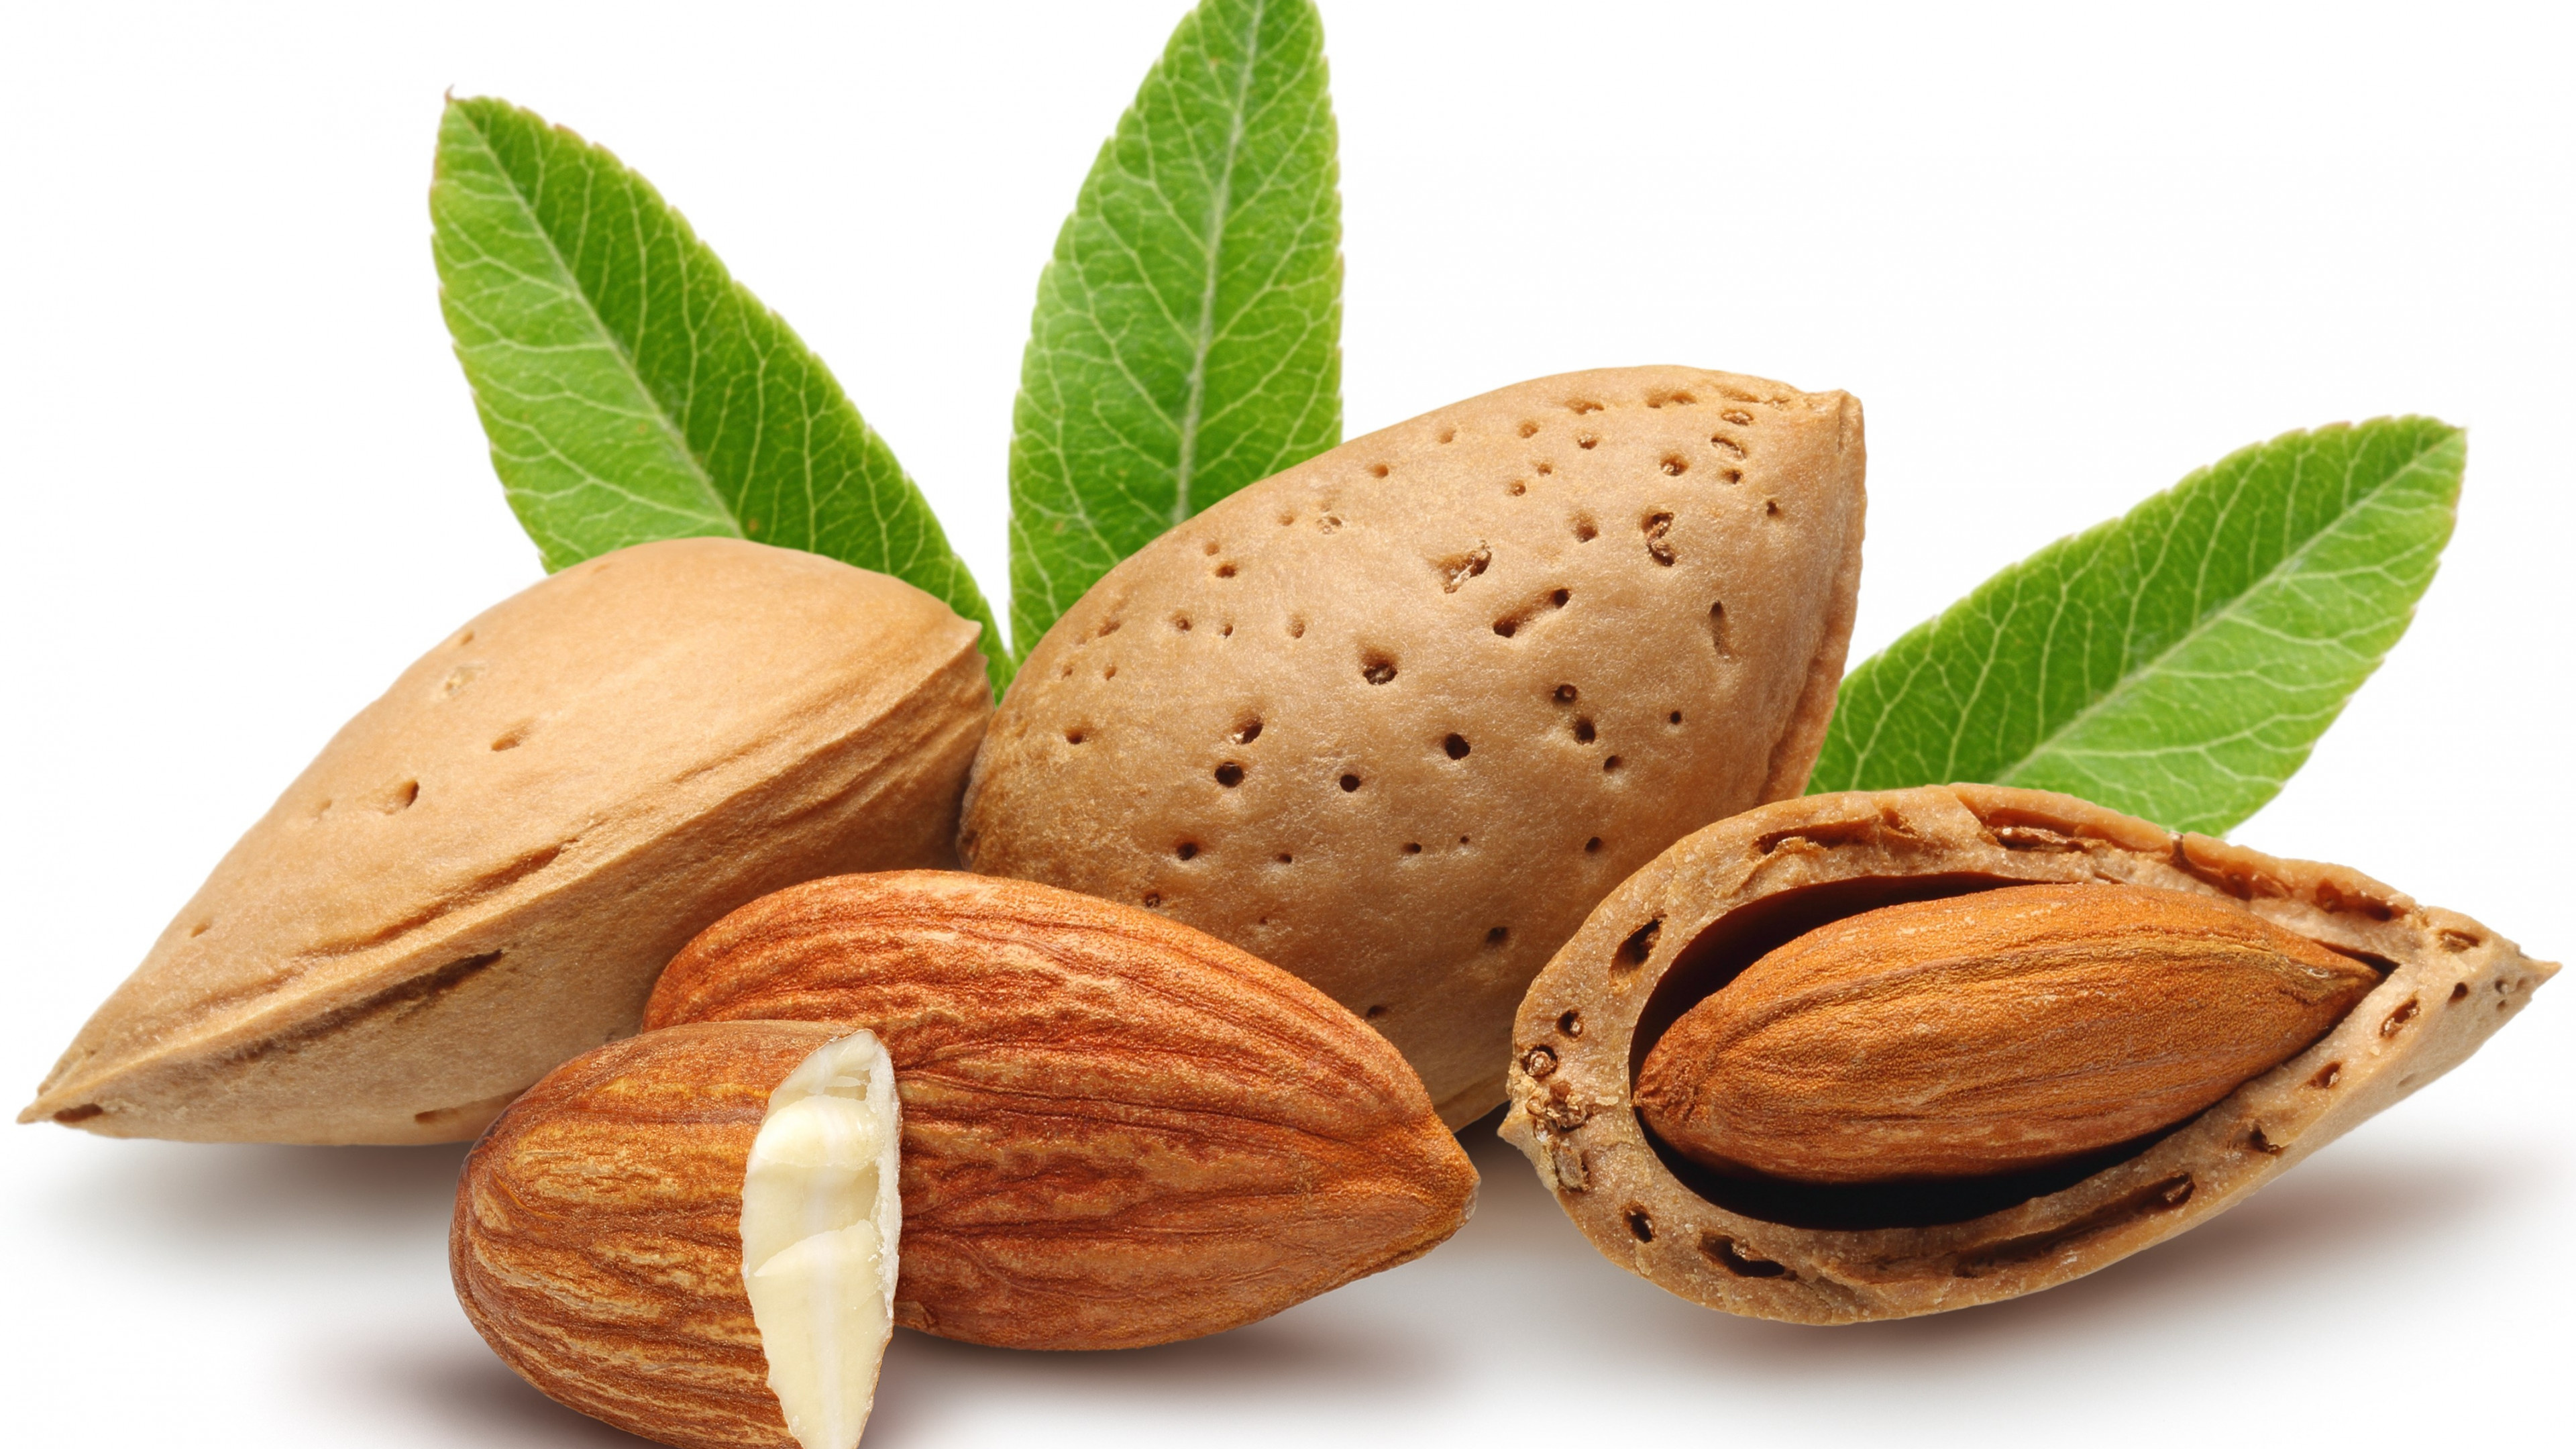 Nutty delights, Indulging taste buds, Scrumptious visuals, Nature's wholesome goodness, 3840x2160 4K Desktop